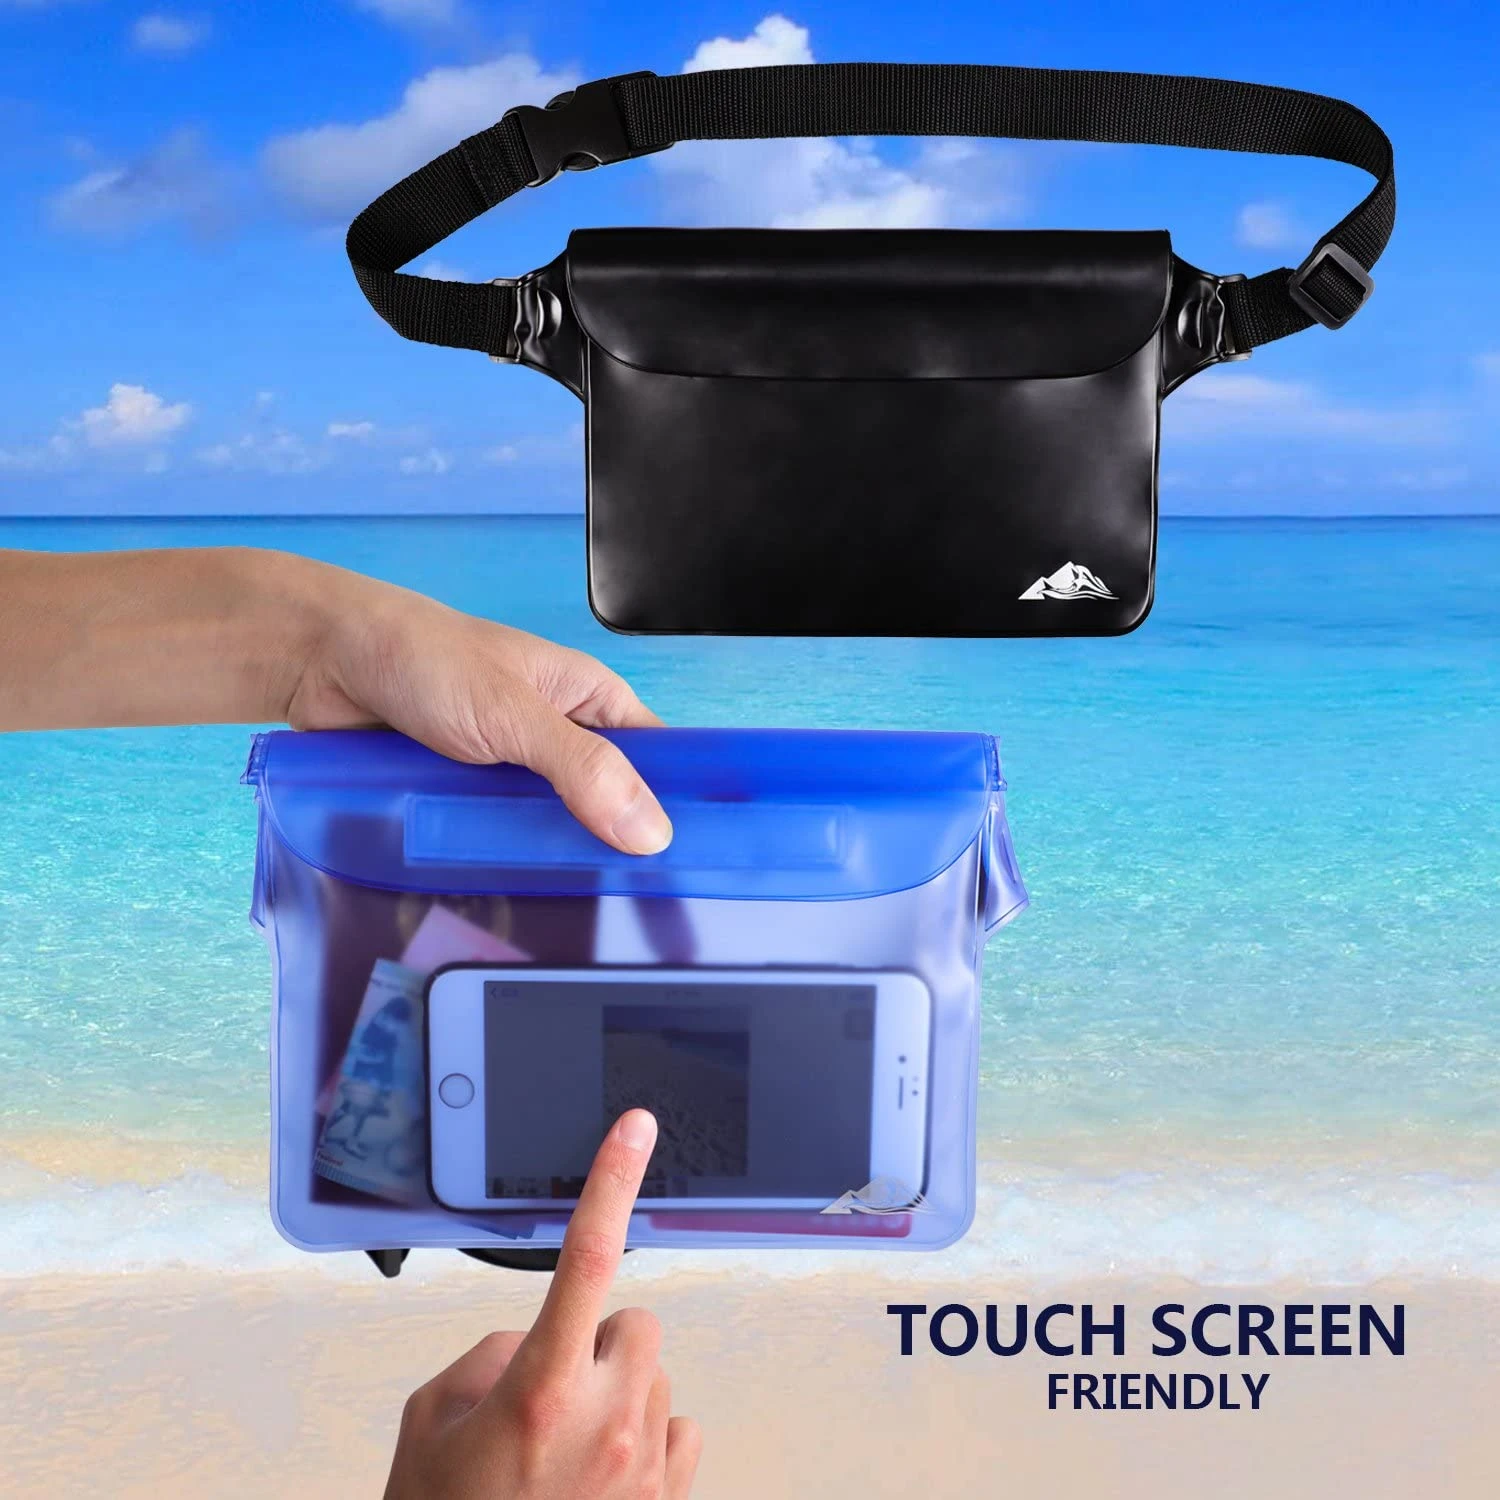 Waterproof Pouch with Waist Strap, Screen Touchable Dry Bag with Adjustable Belt for Phone Valuables for Swimming Snorkeling Boa